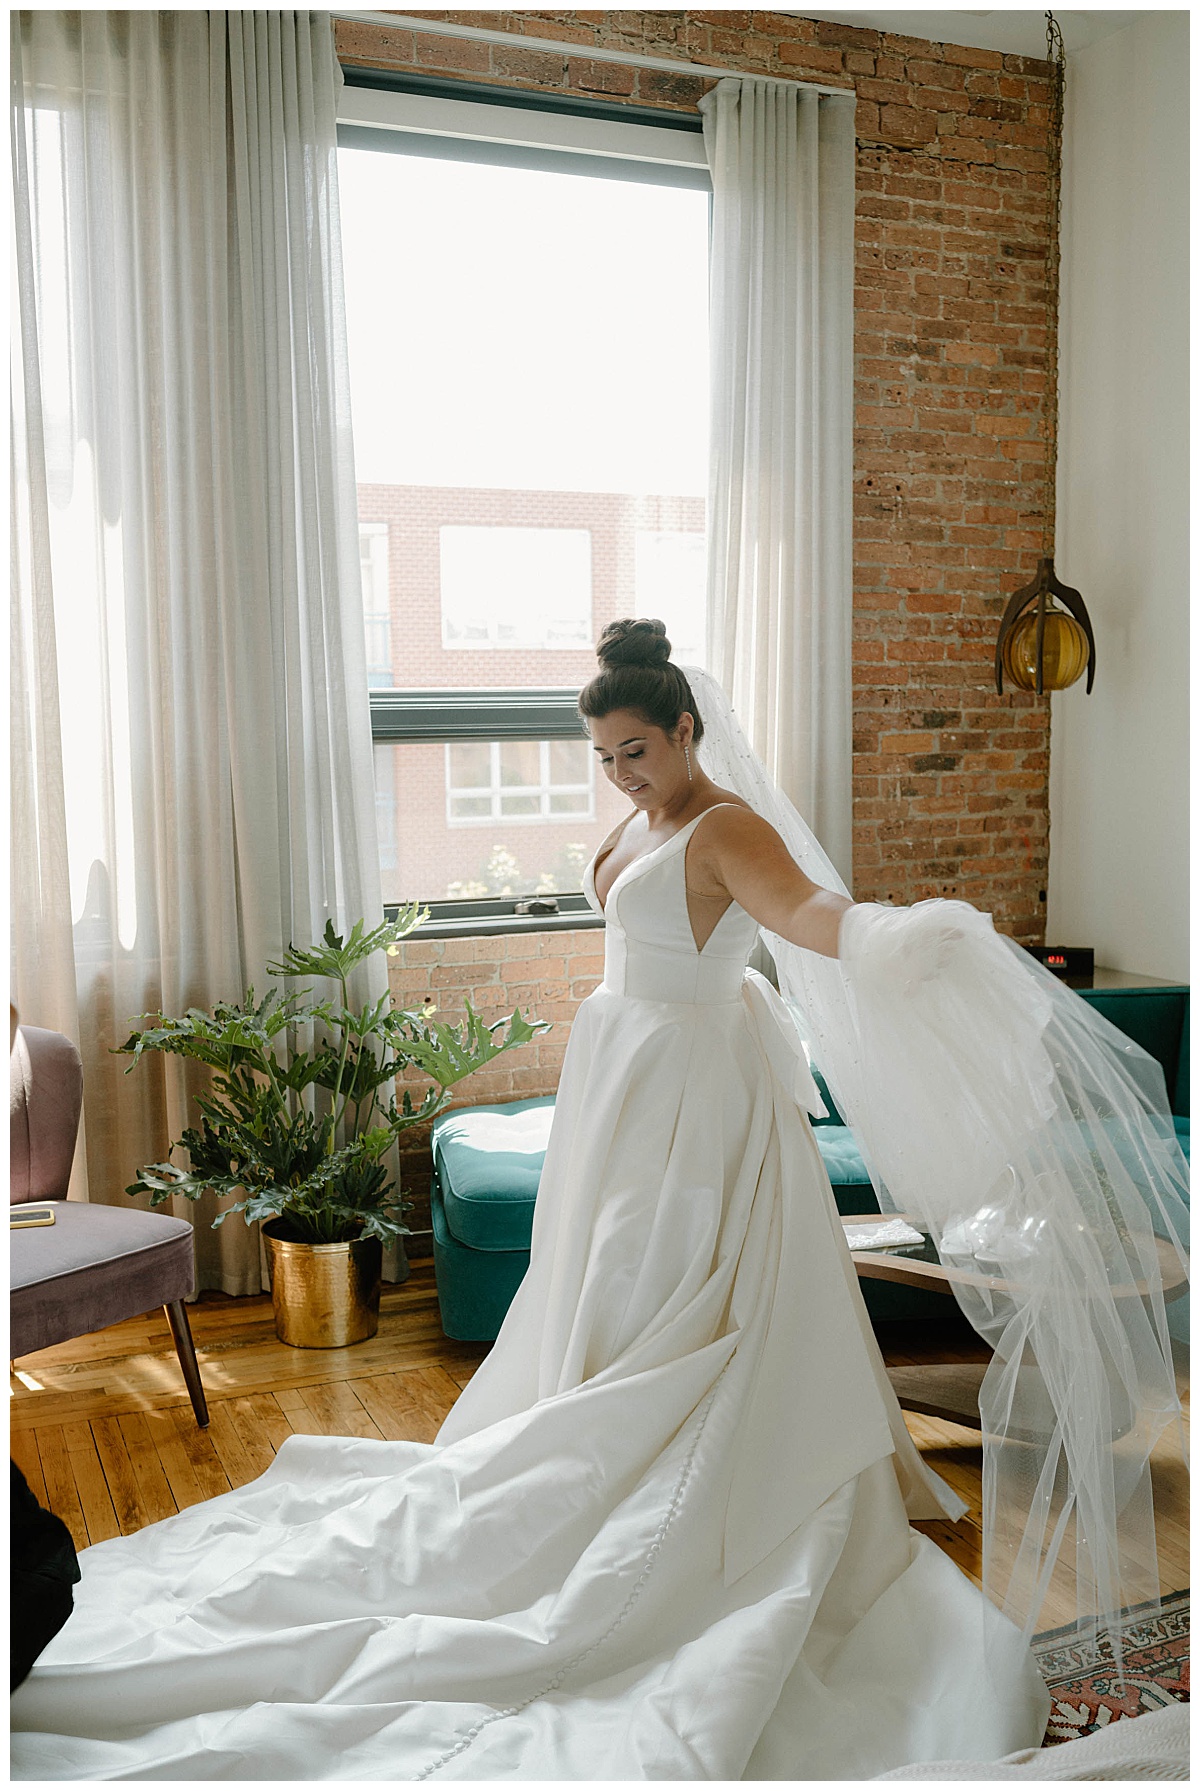 woman holds out veil as she looks at her gown by Chicago photographer